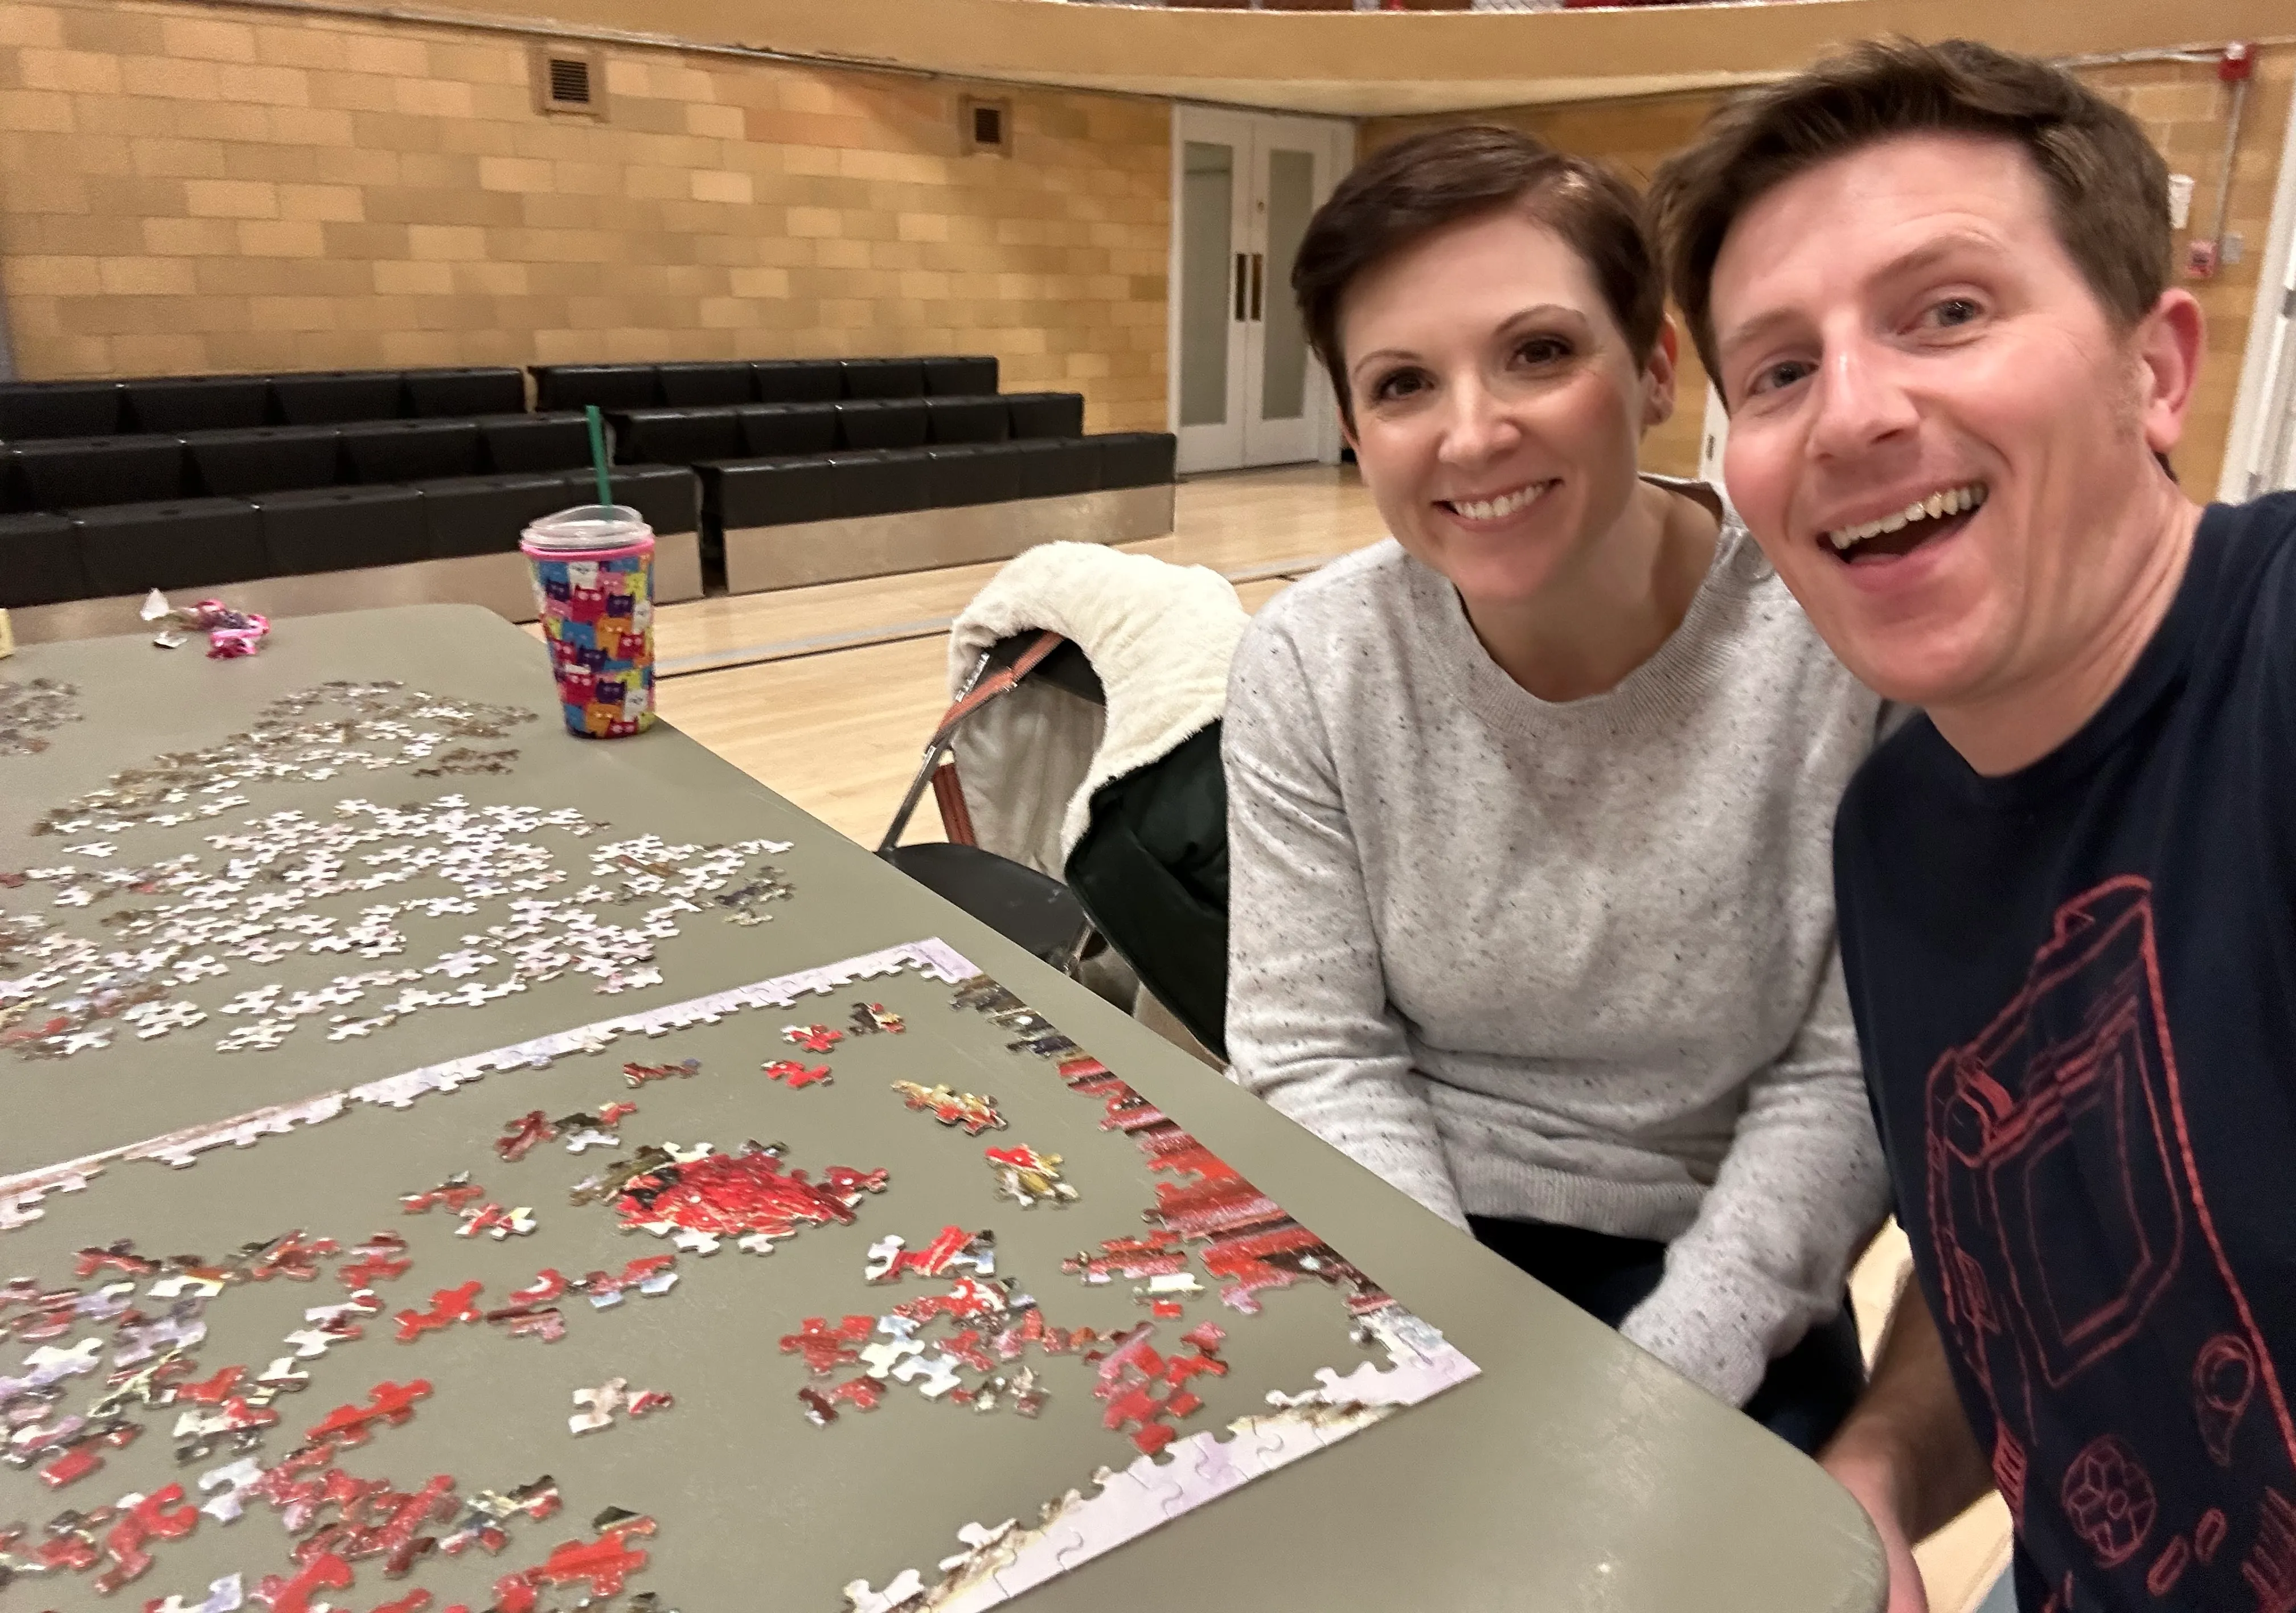 Brian and Kim with disappointingly unfinished puzzle